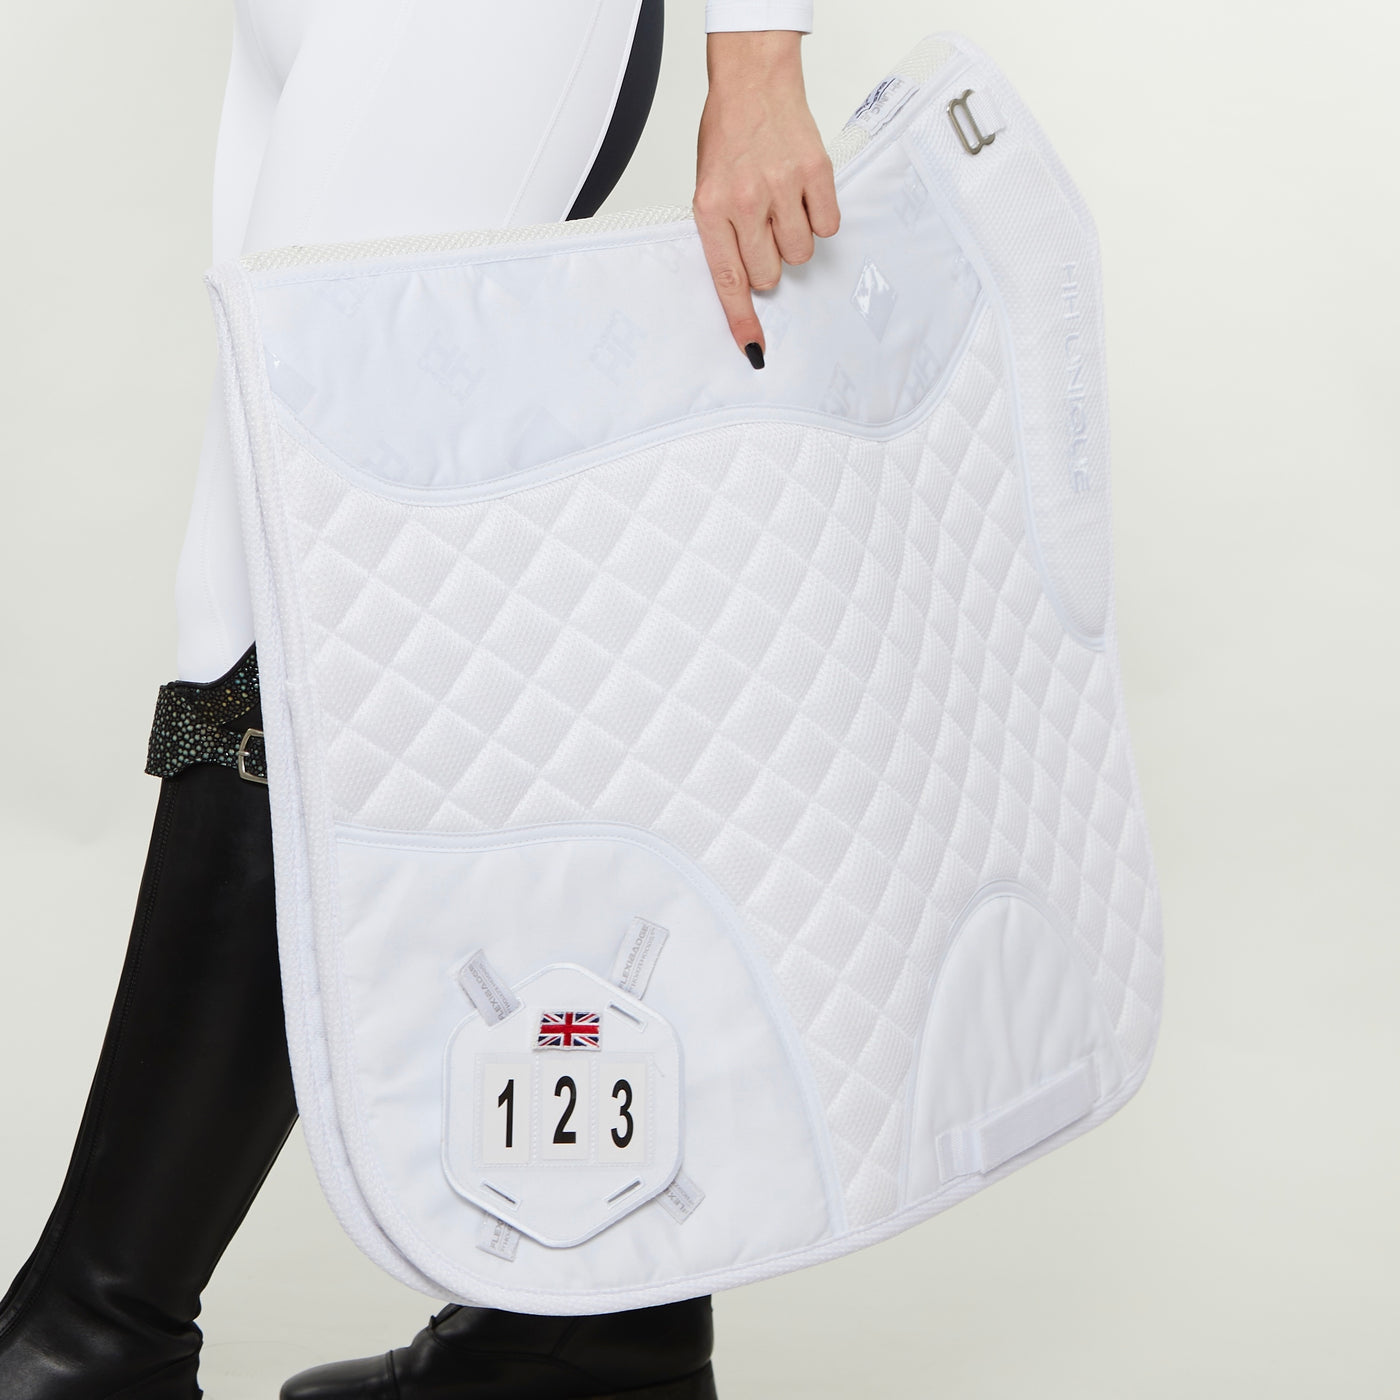 2-1 White Competition Dressage Pad & Kit - 6 Colours Available